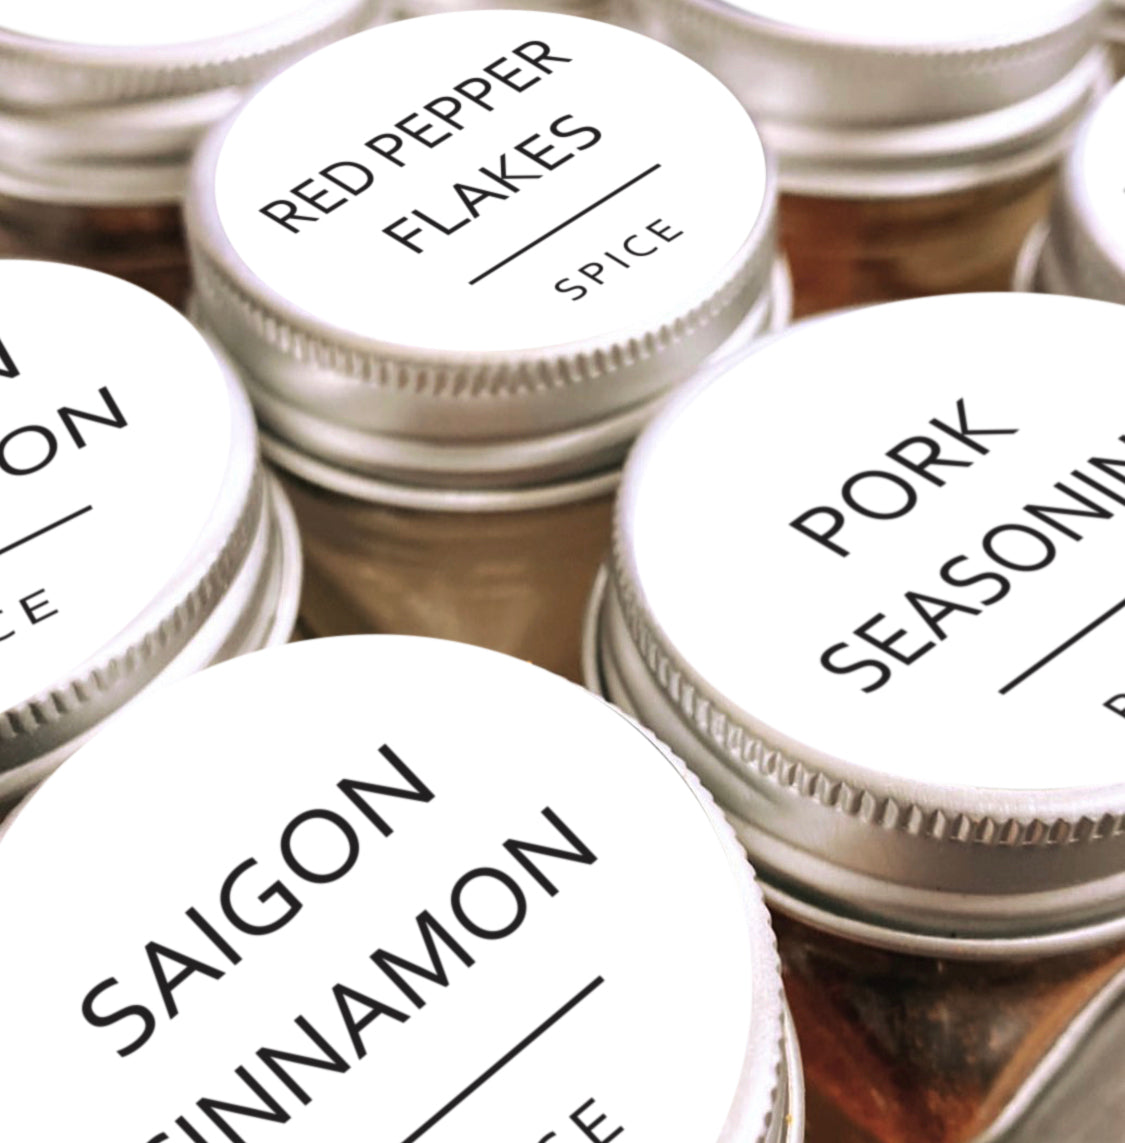 Talented Kitchen 145 Preprinted Spice Jar Labels With Seasoning